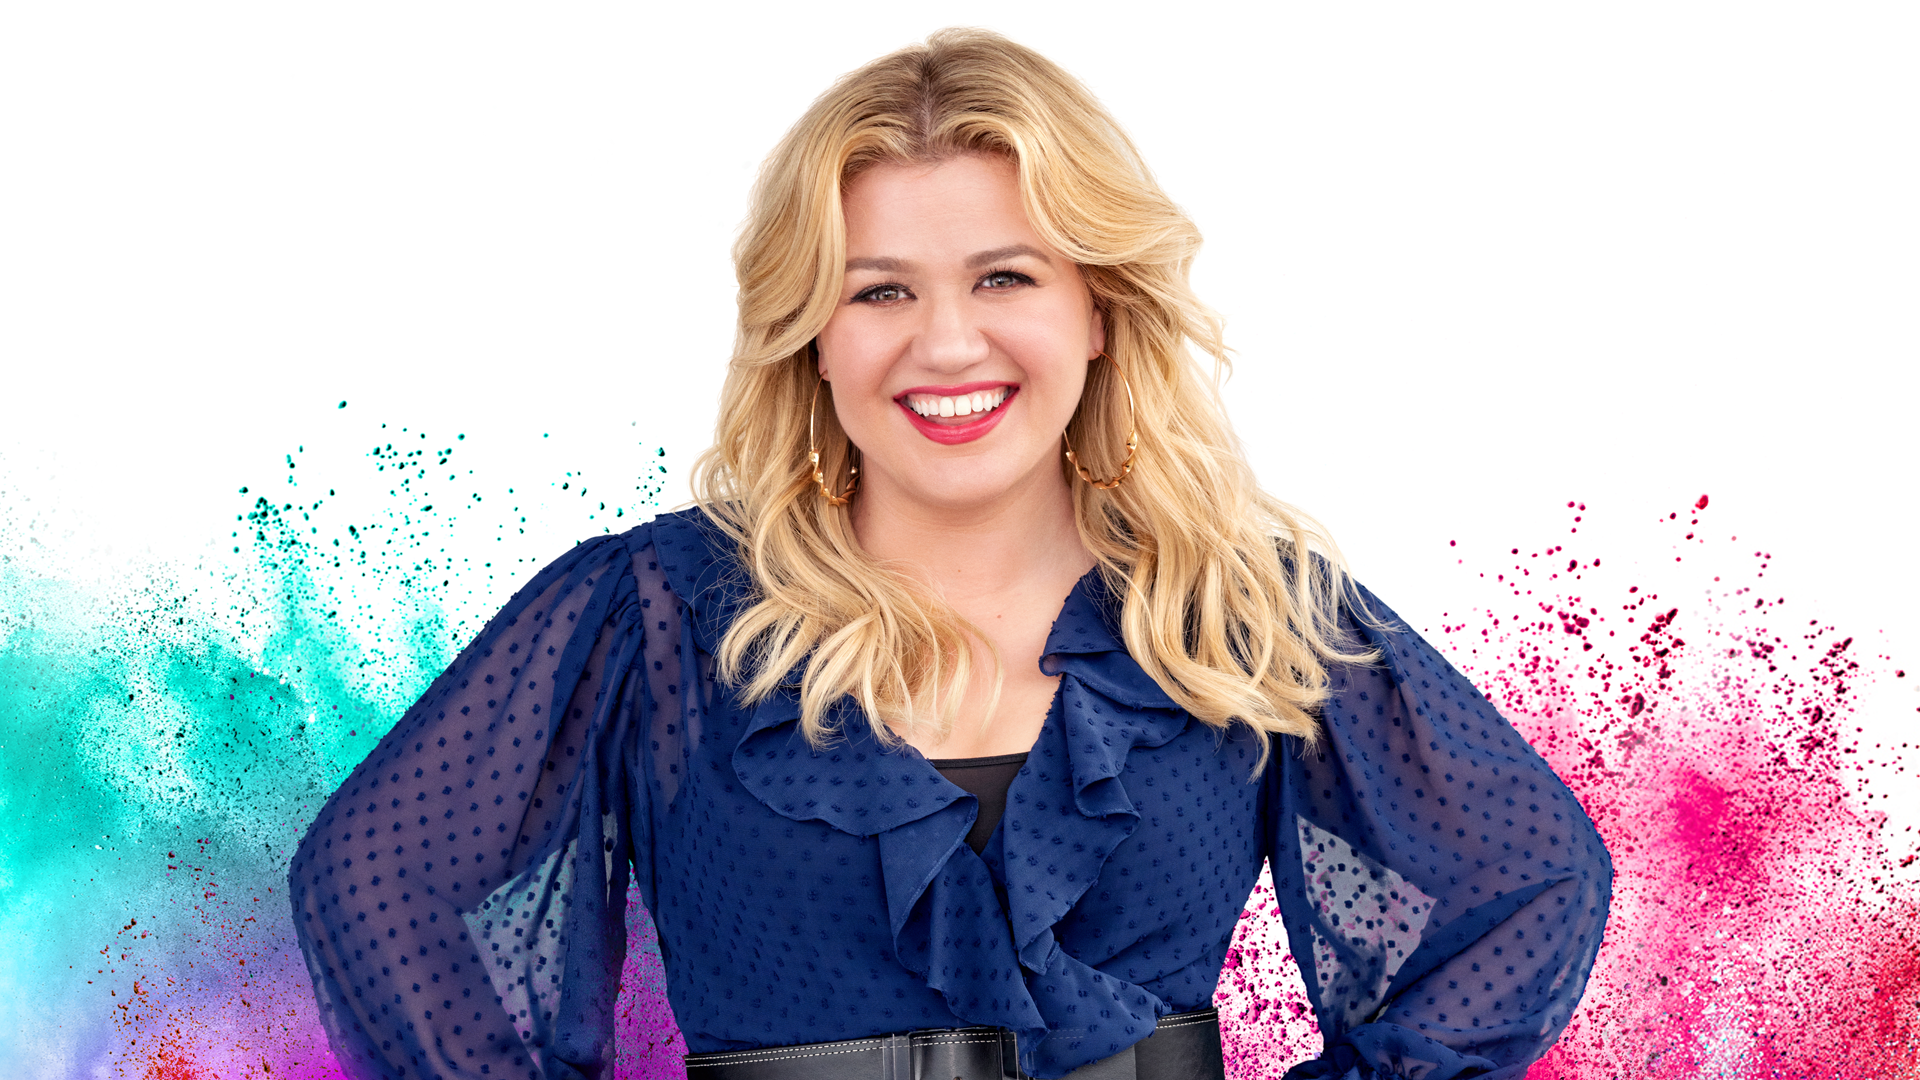 Kelly clarkson movies and tv shows information | tcupbiznes